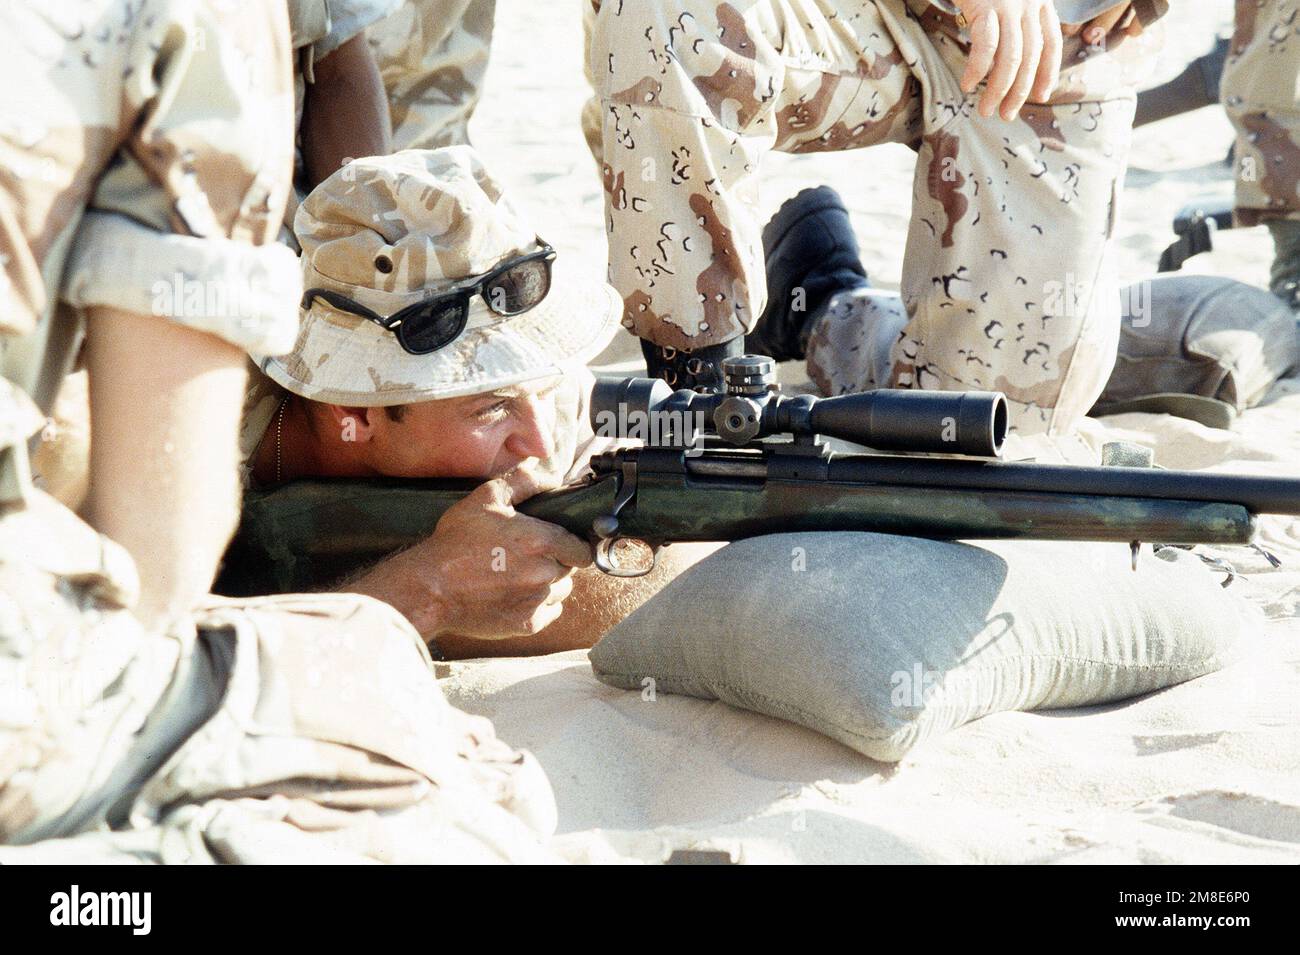 A British soldier from the Queen's Dragoon Guards fires an M-40A1 sniping rifle while taking part in weapons training with Marines from 7th Platoon, 1ST Force Reconnaissance Company, at Abu Hydra Range during Operation Desert Shield. Subject Operation/Series: DESERT SHIELD Country: Saudi Arabia (SAU) Stock Photo